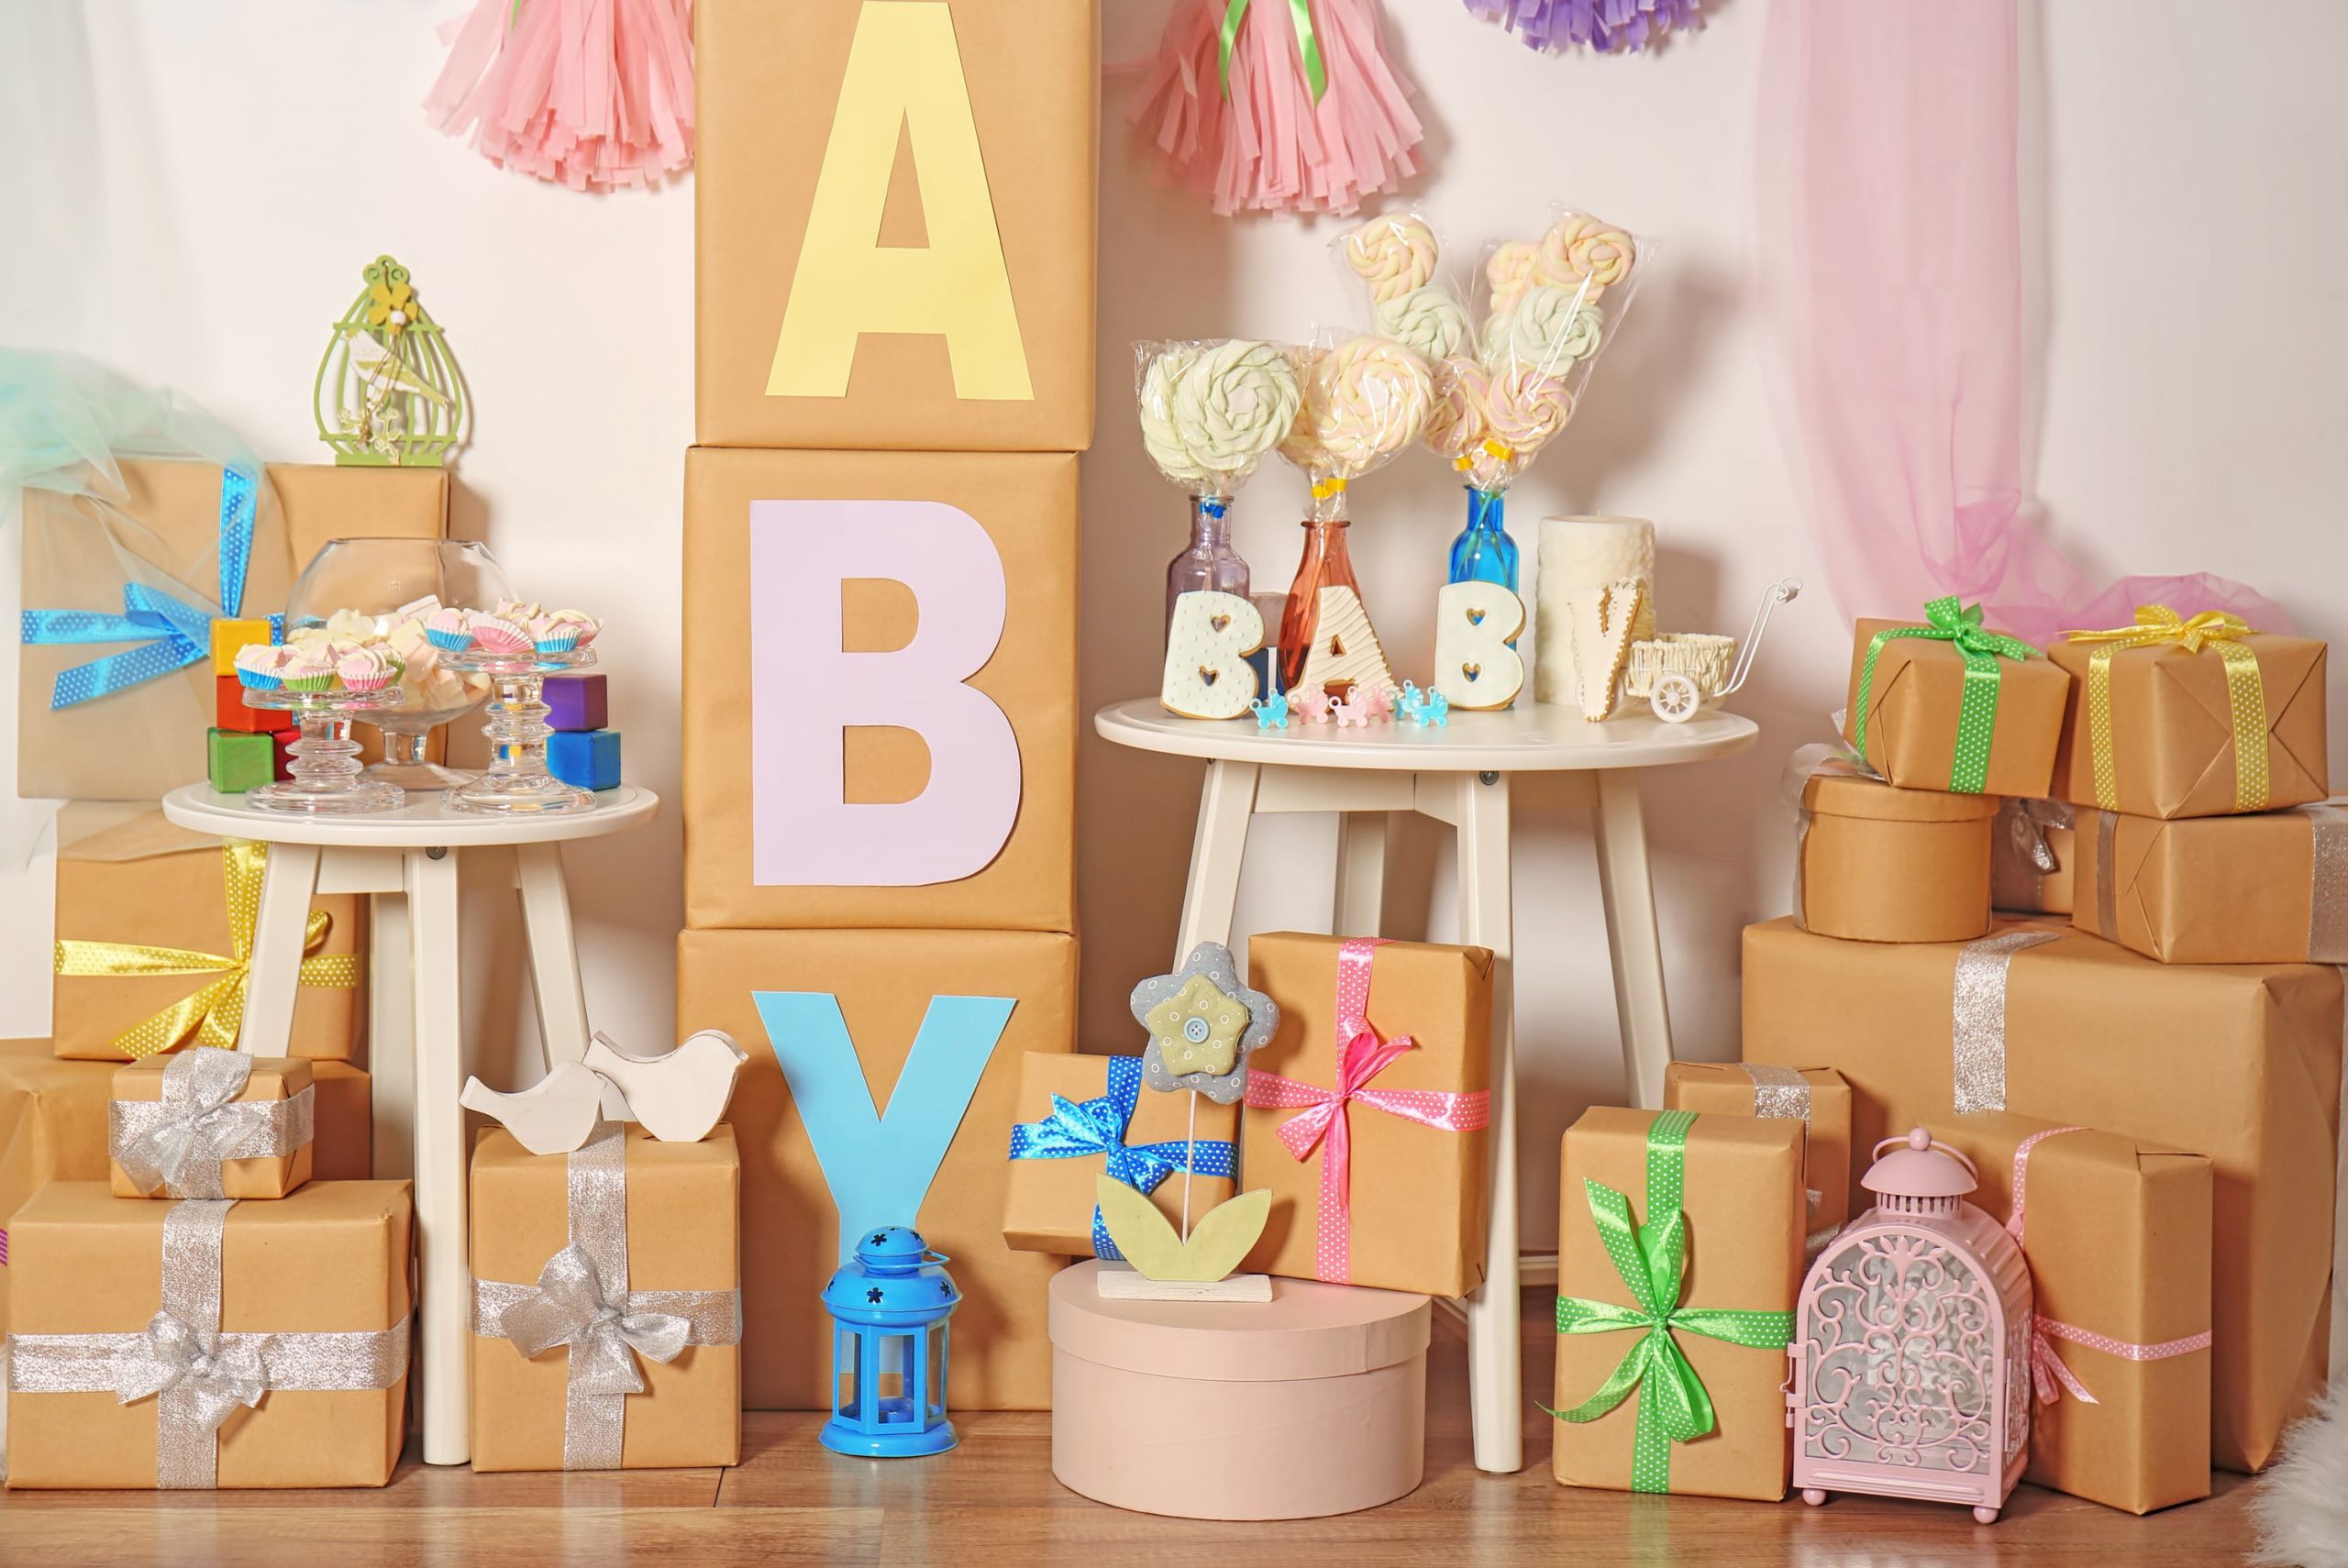 Diy Baby Shower Decorations On A Budget
 5 Cheap & Unique Baby Shower Decoration Ideas